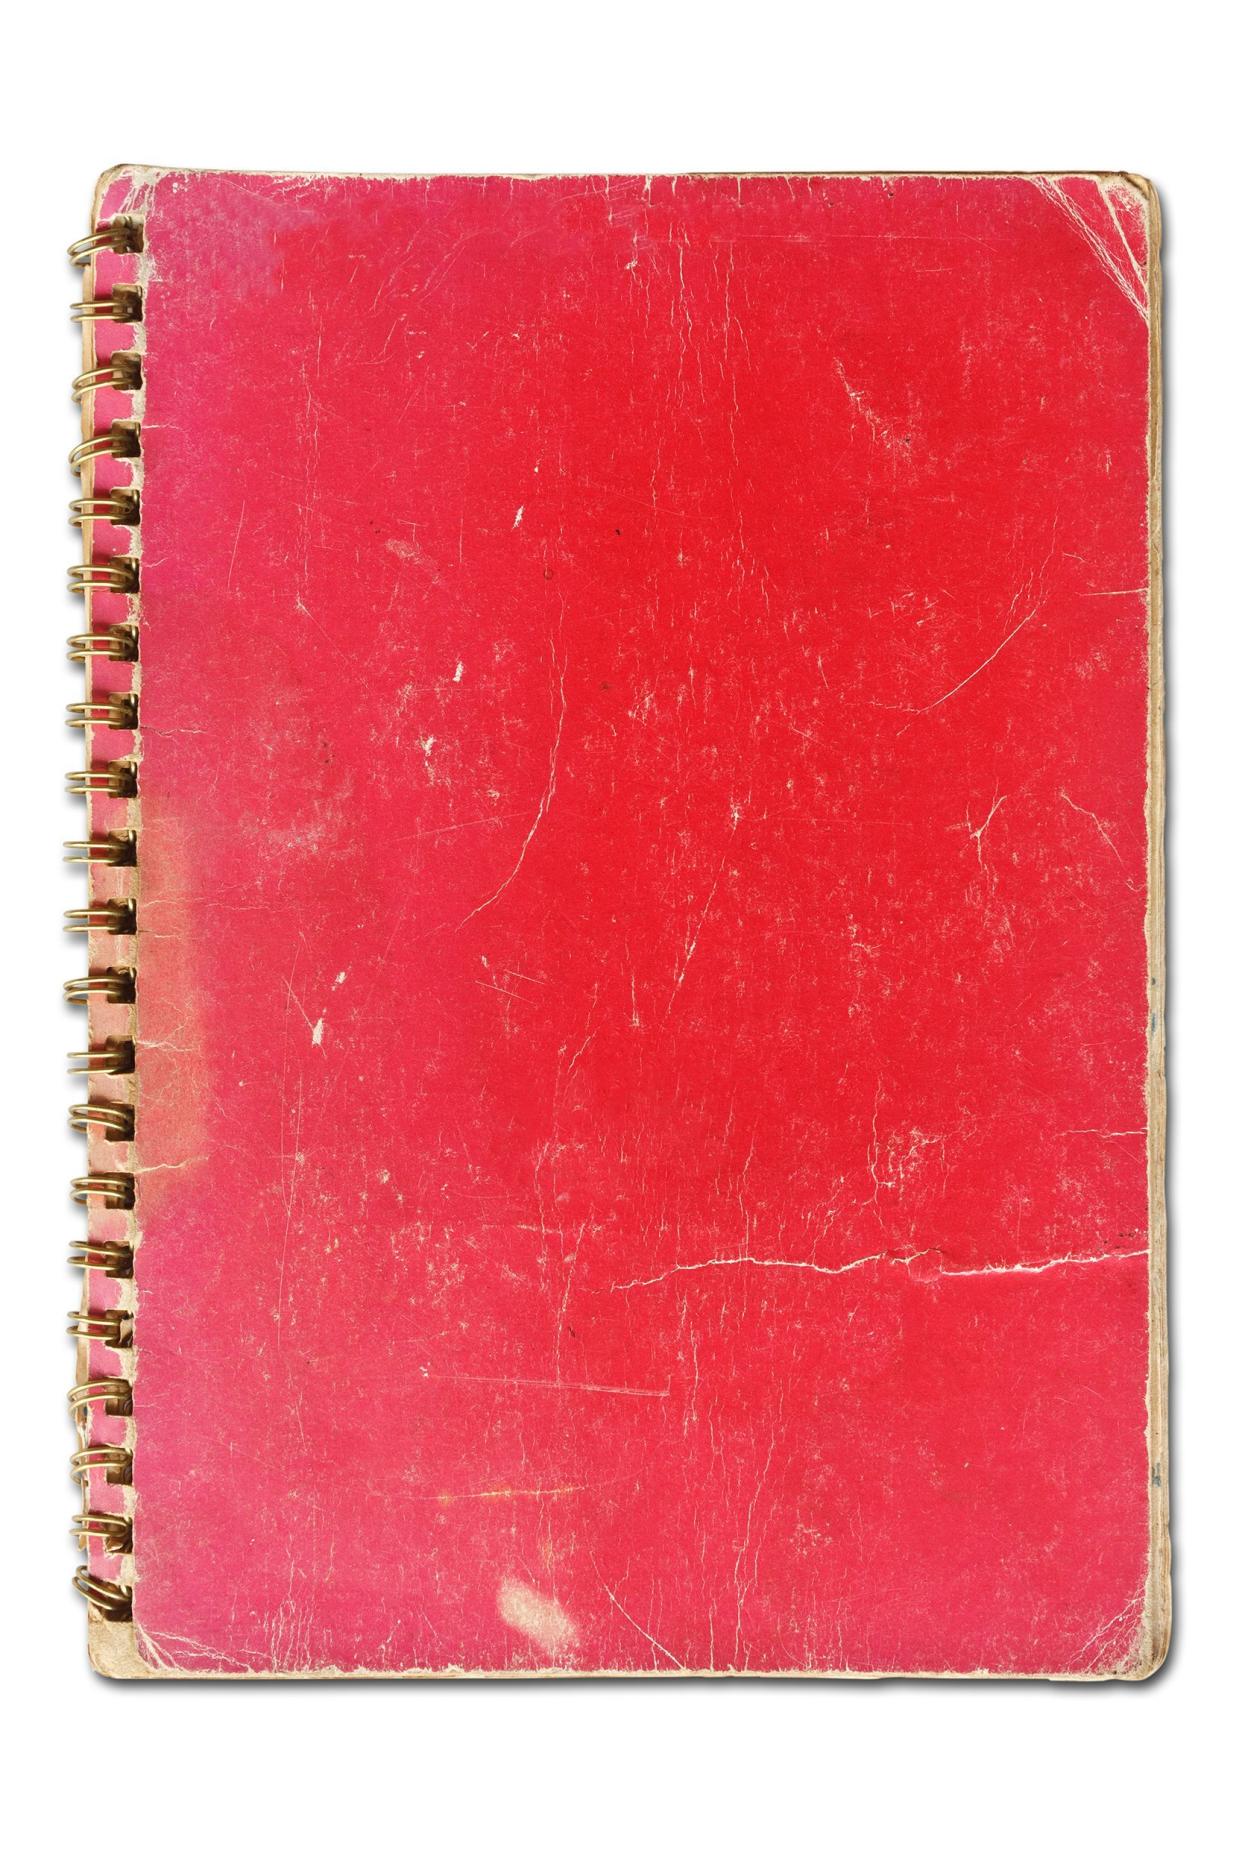 old red cover notebook